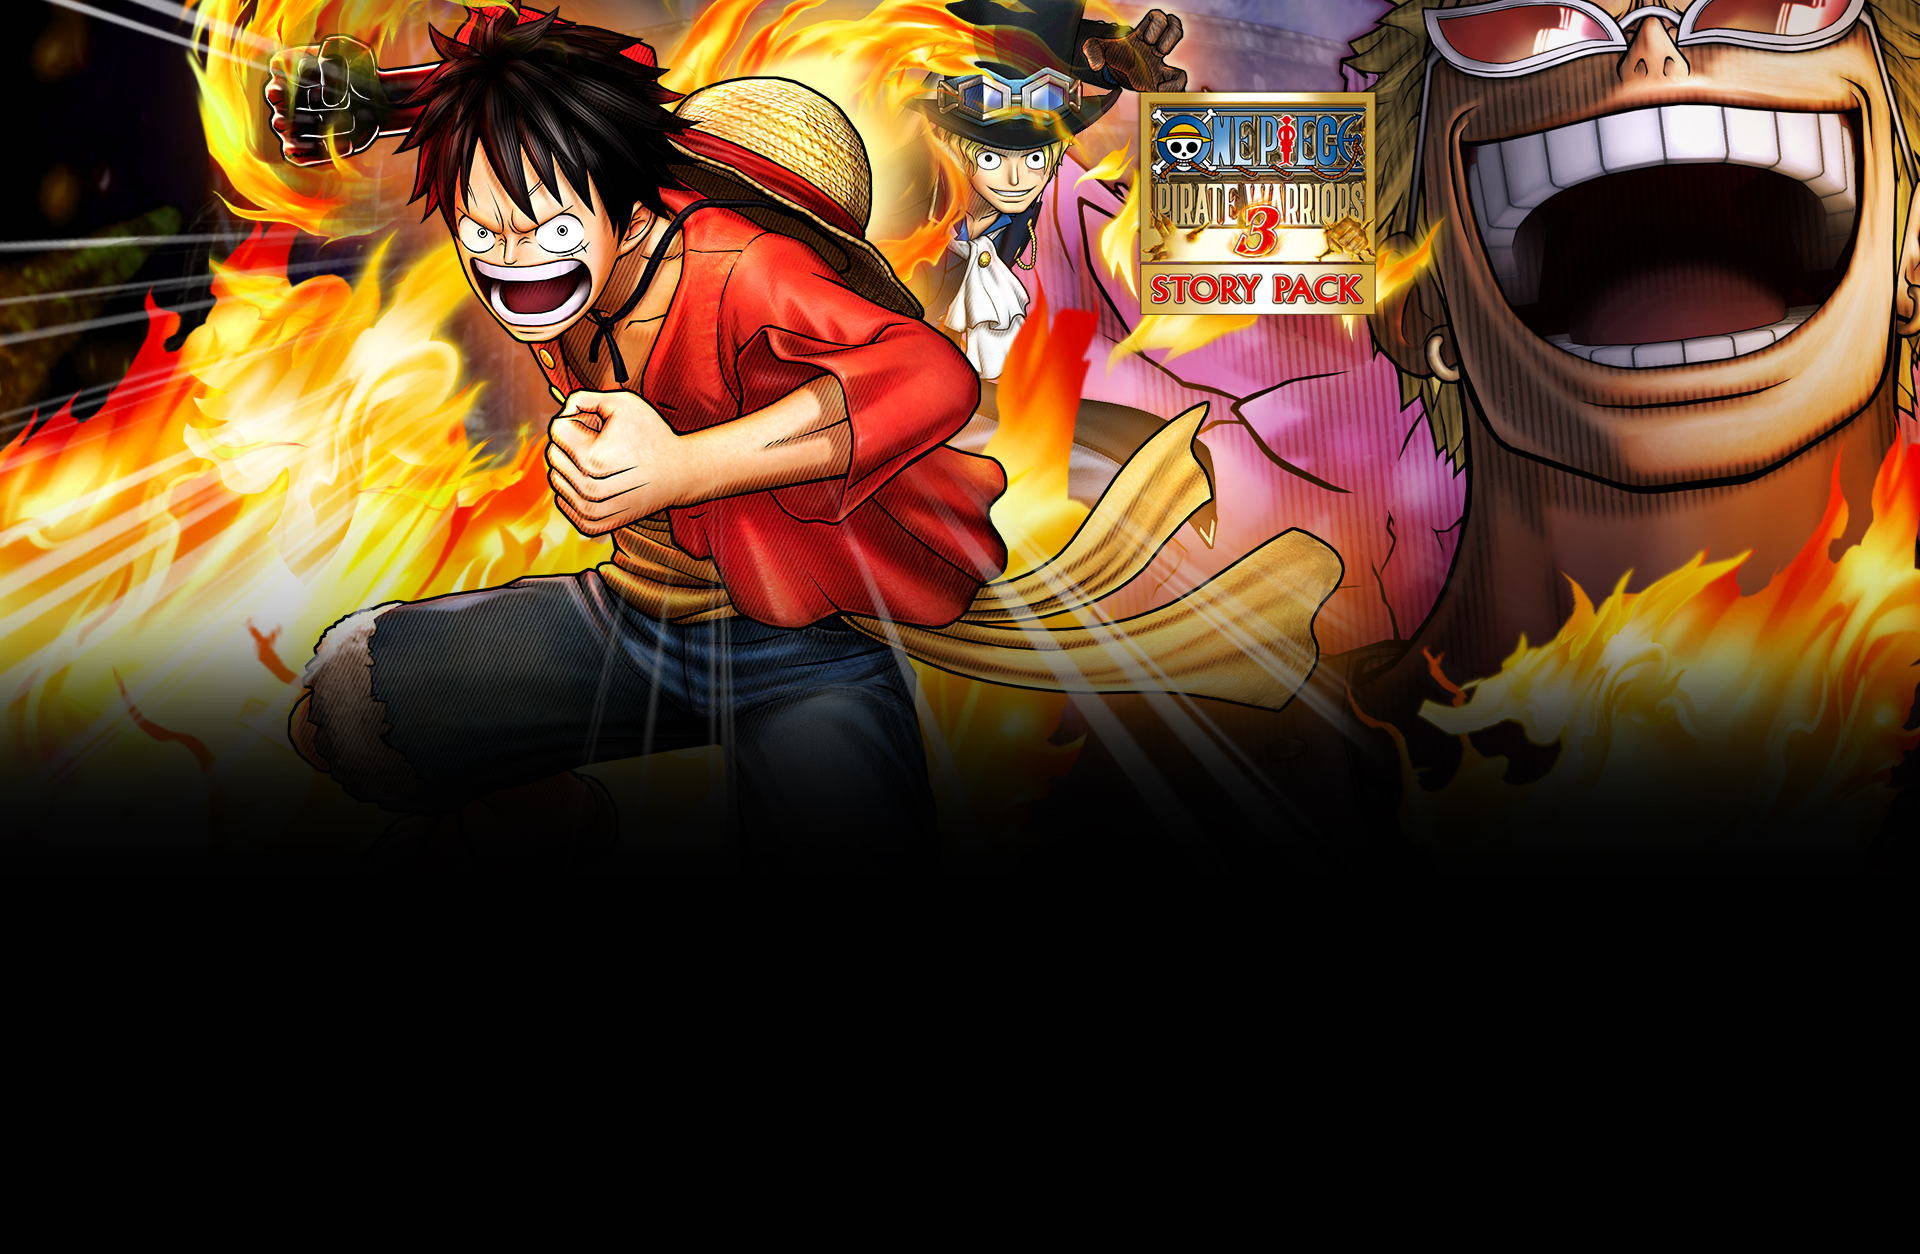 One Piece Pirate Warriors 3 - Story Pack